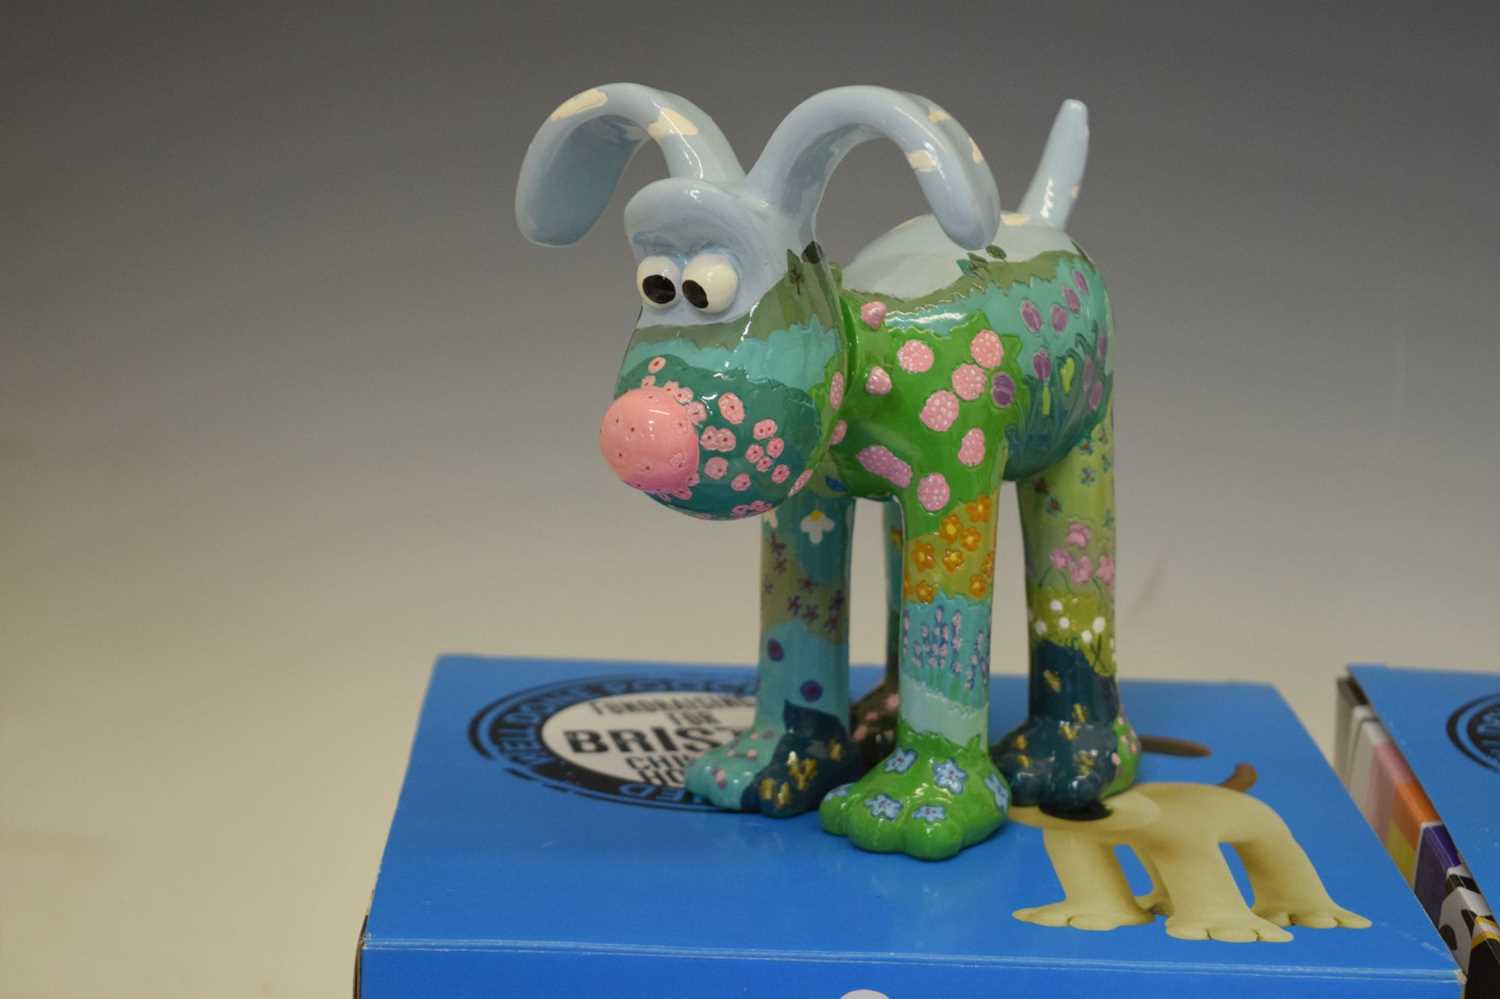 Aardman/Wallace and Gromit - 'Gromit Unleashed' figures - Image 3 of 11